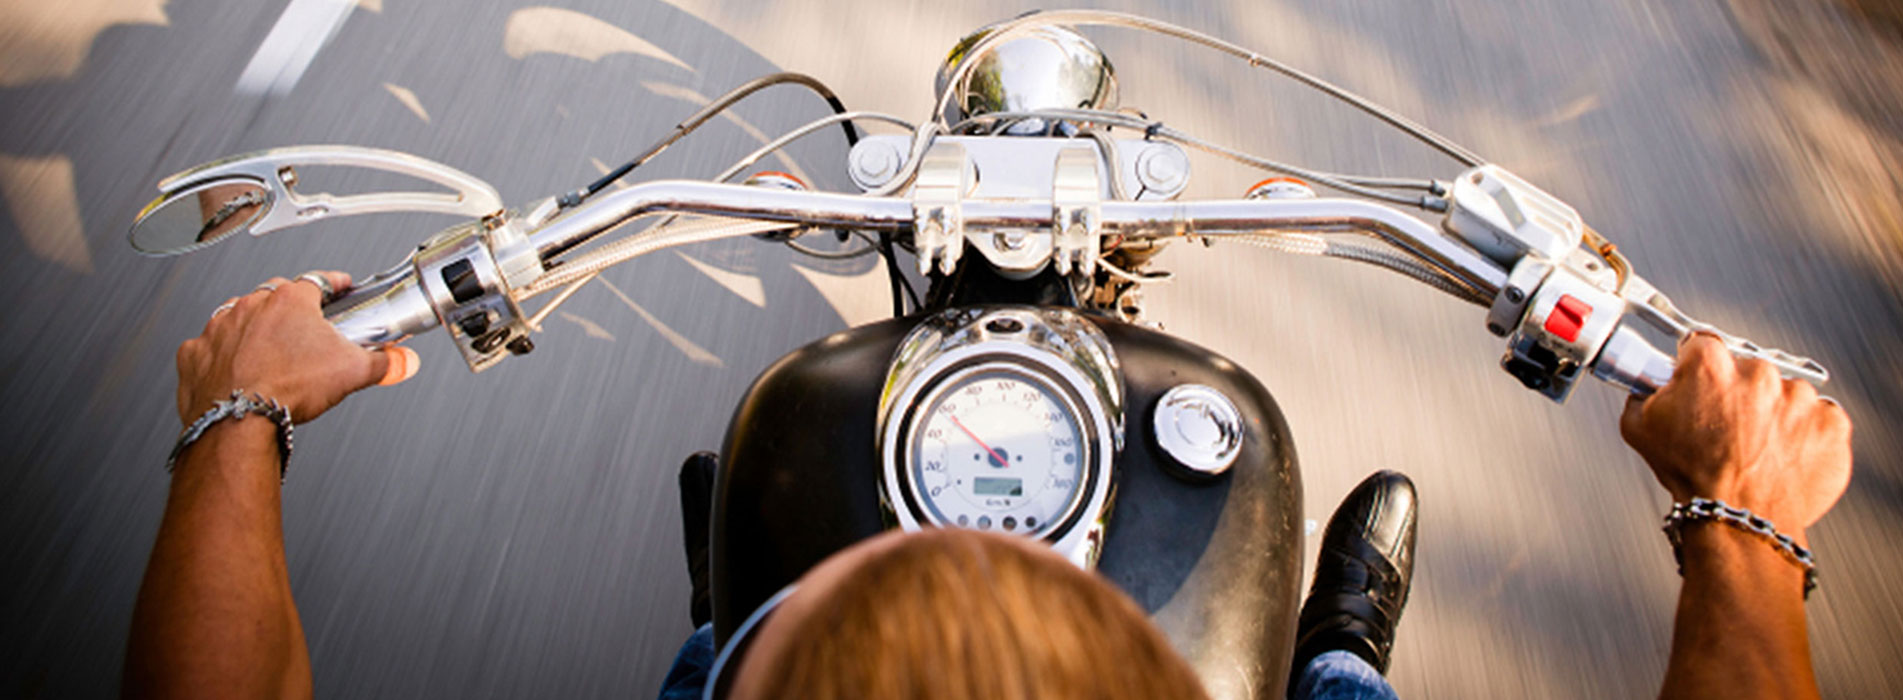 Michigan Motorcycle insurance coverage